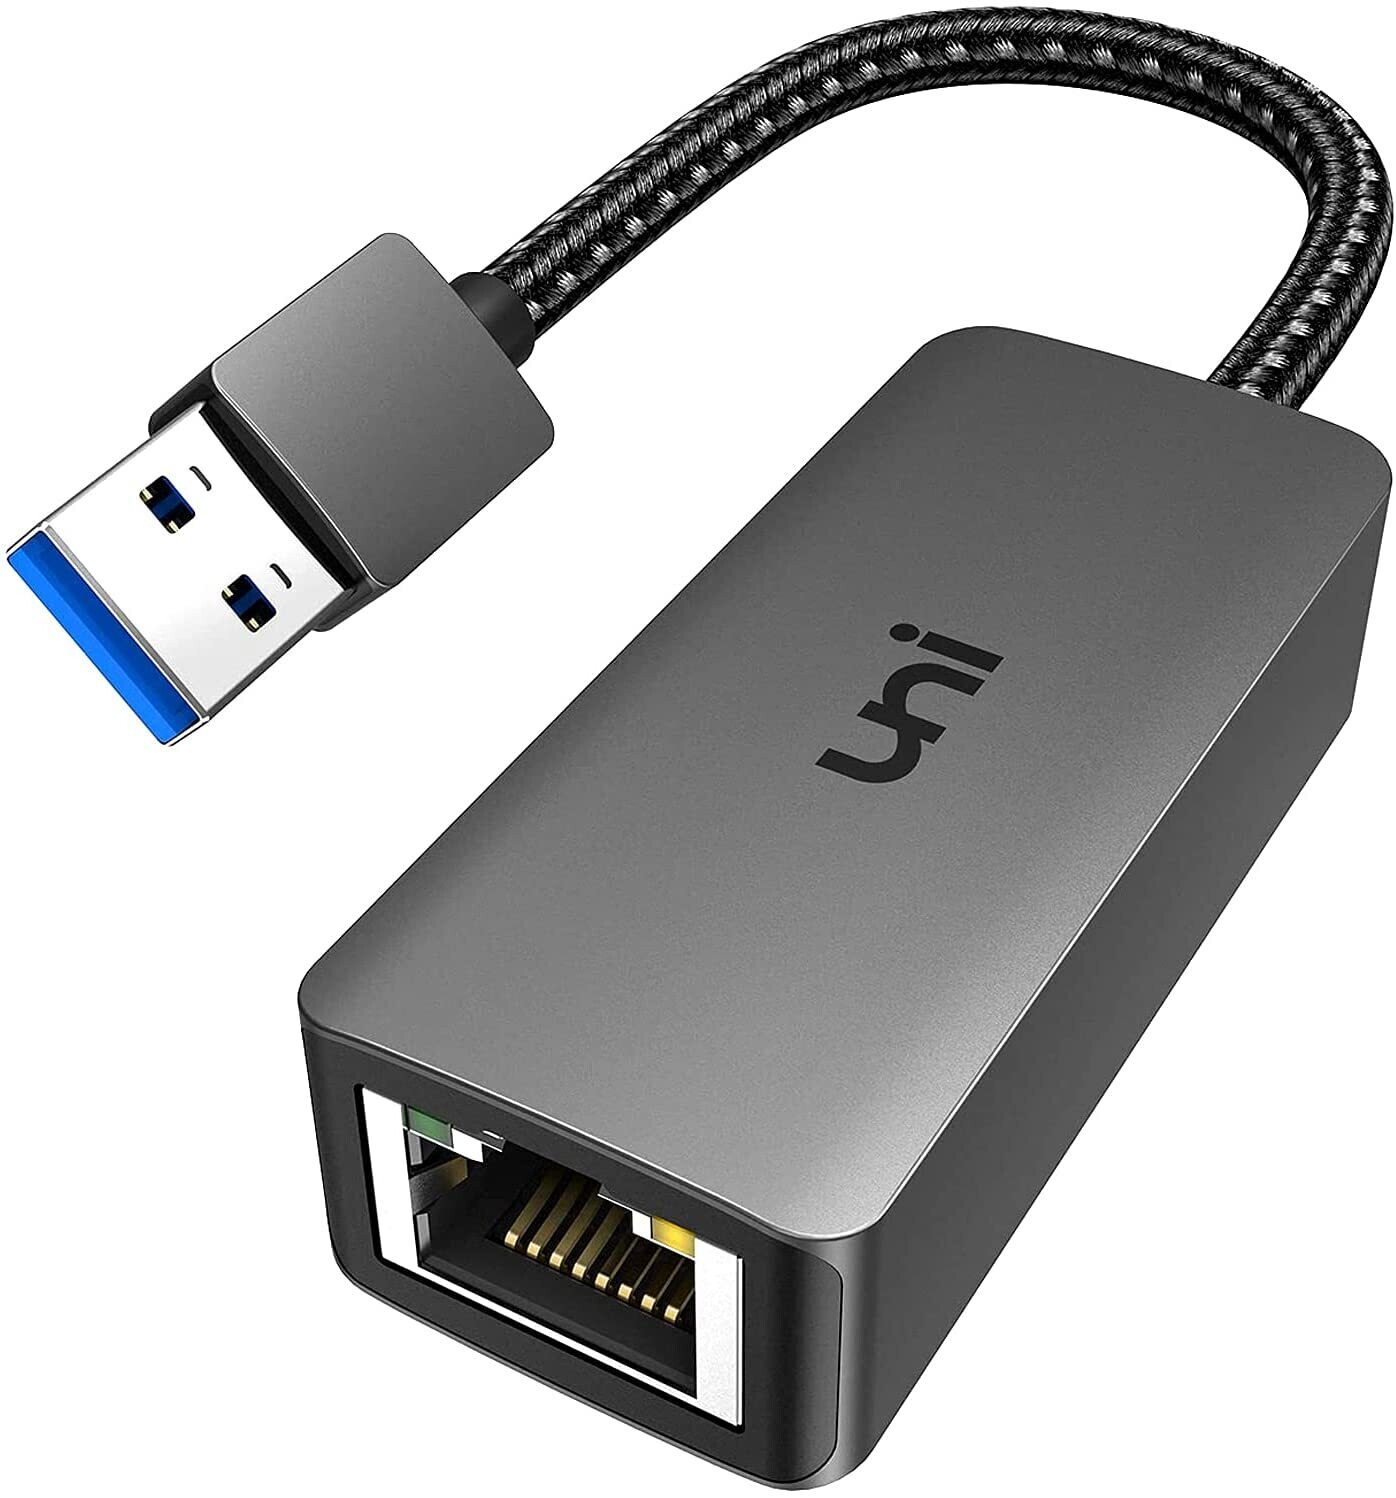 Uni USB to Ethernet Adapter - USB 3.0 to 100/1000 Gigabit Ethernet LAN Network Adapter, RJ45 Internet Adapter Compatible with Windows/Mac/Linux